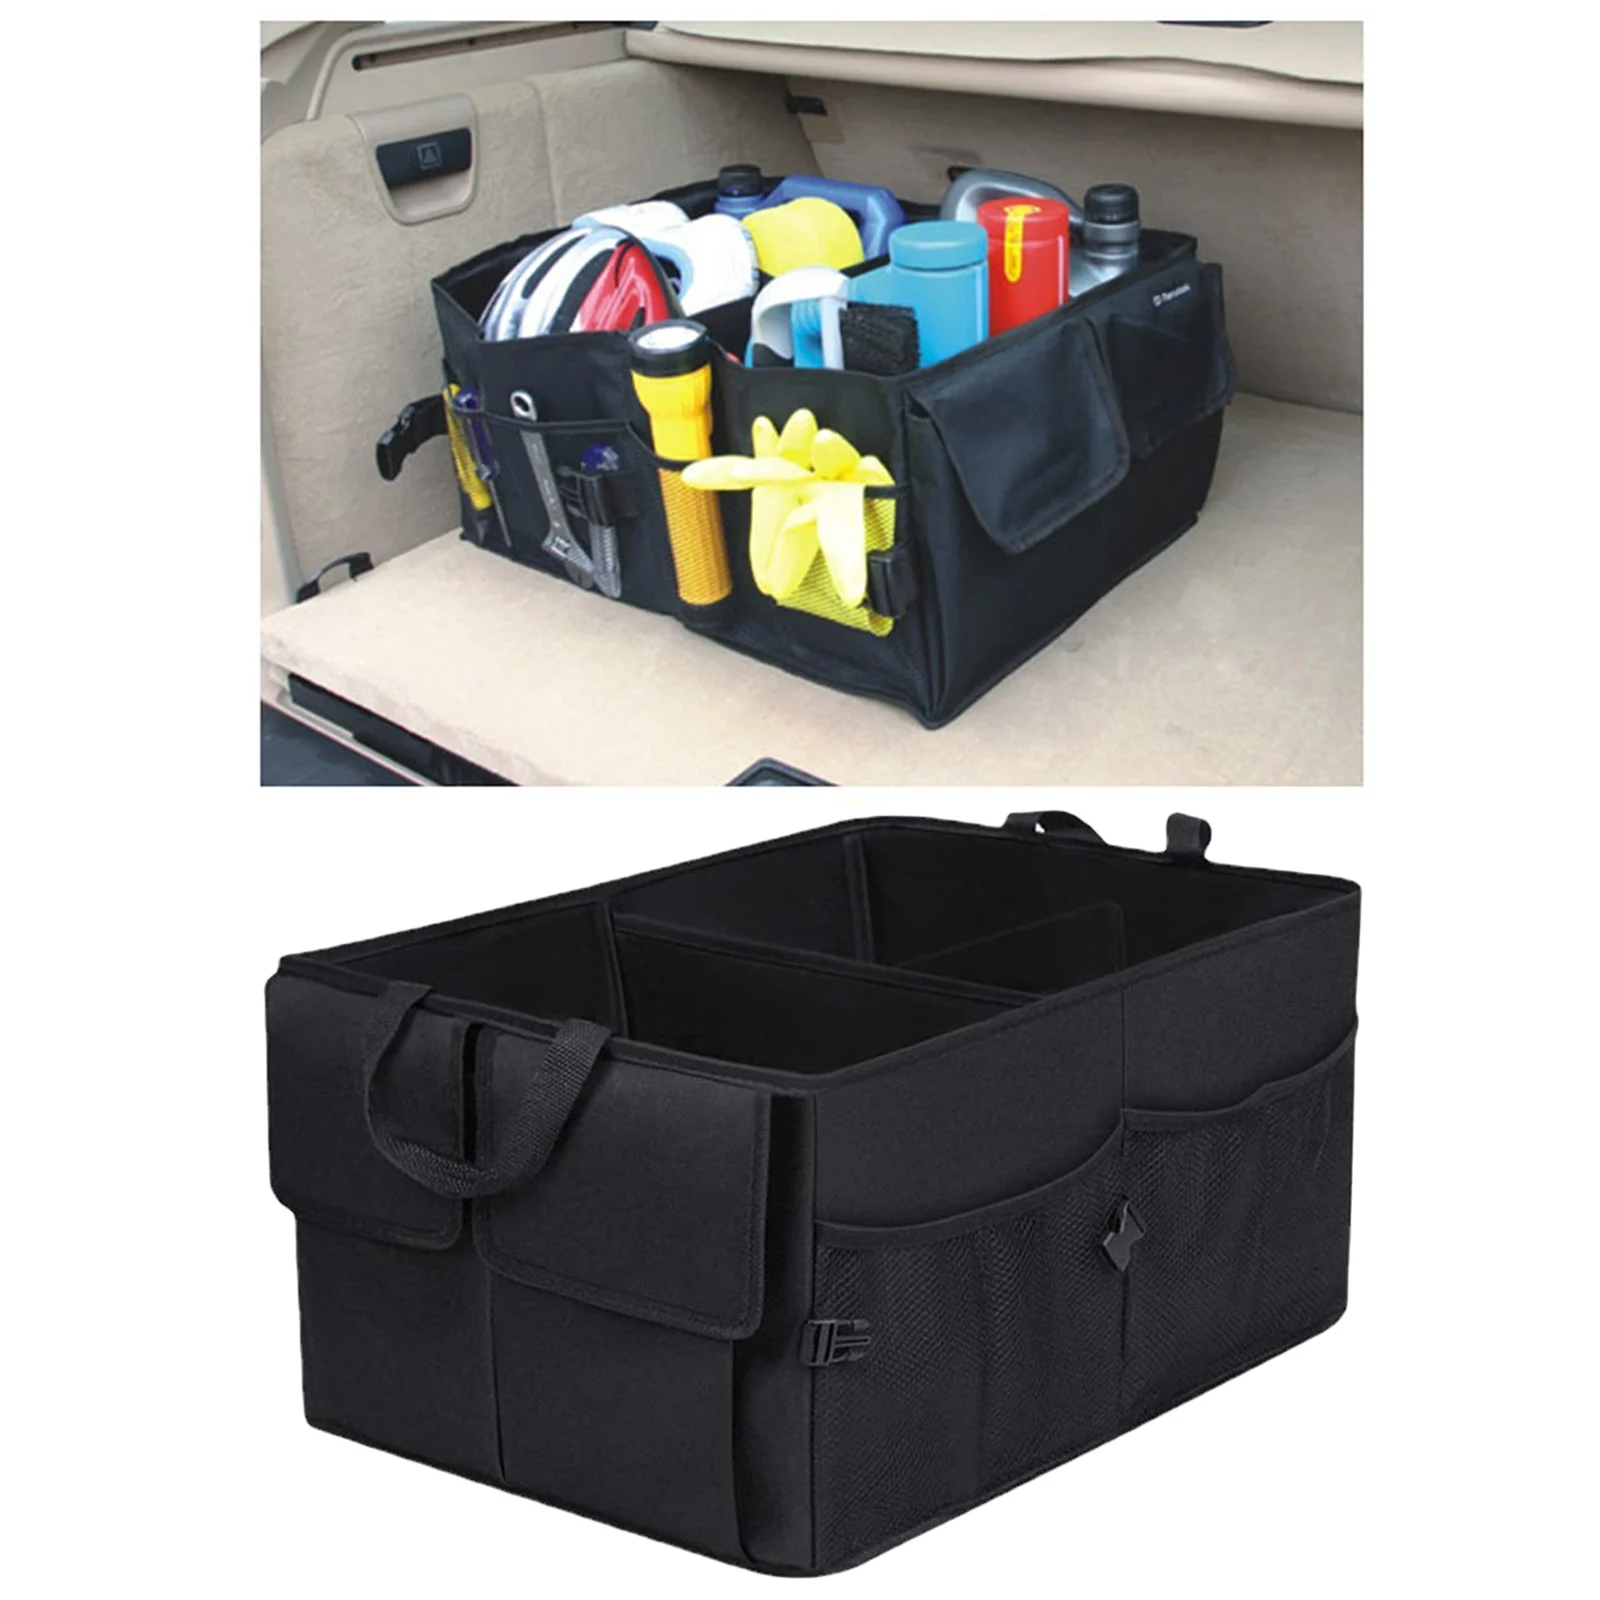 Car Boot Organiser Foldable Storage Bag, Non Slip, Super Large Capacity, for Business or Solo Travel